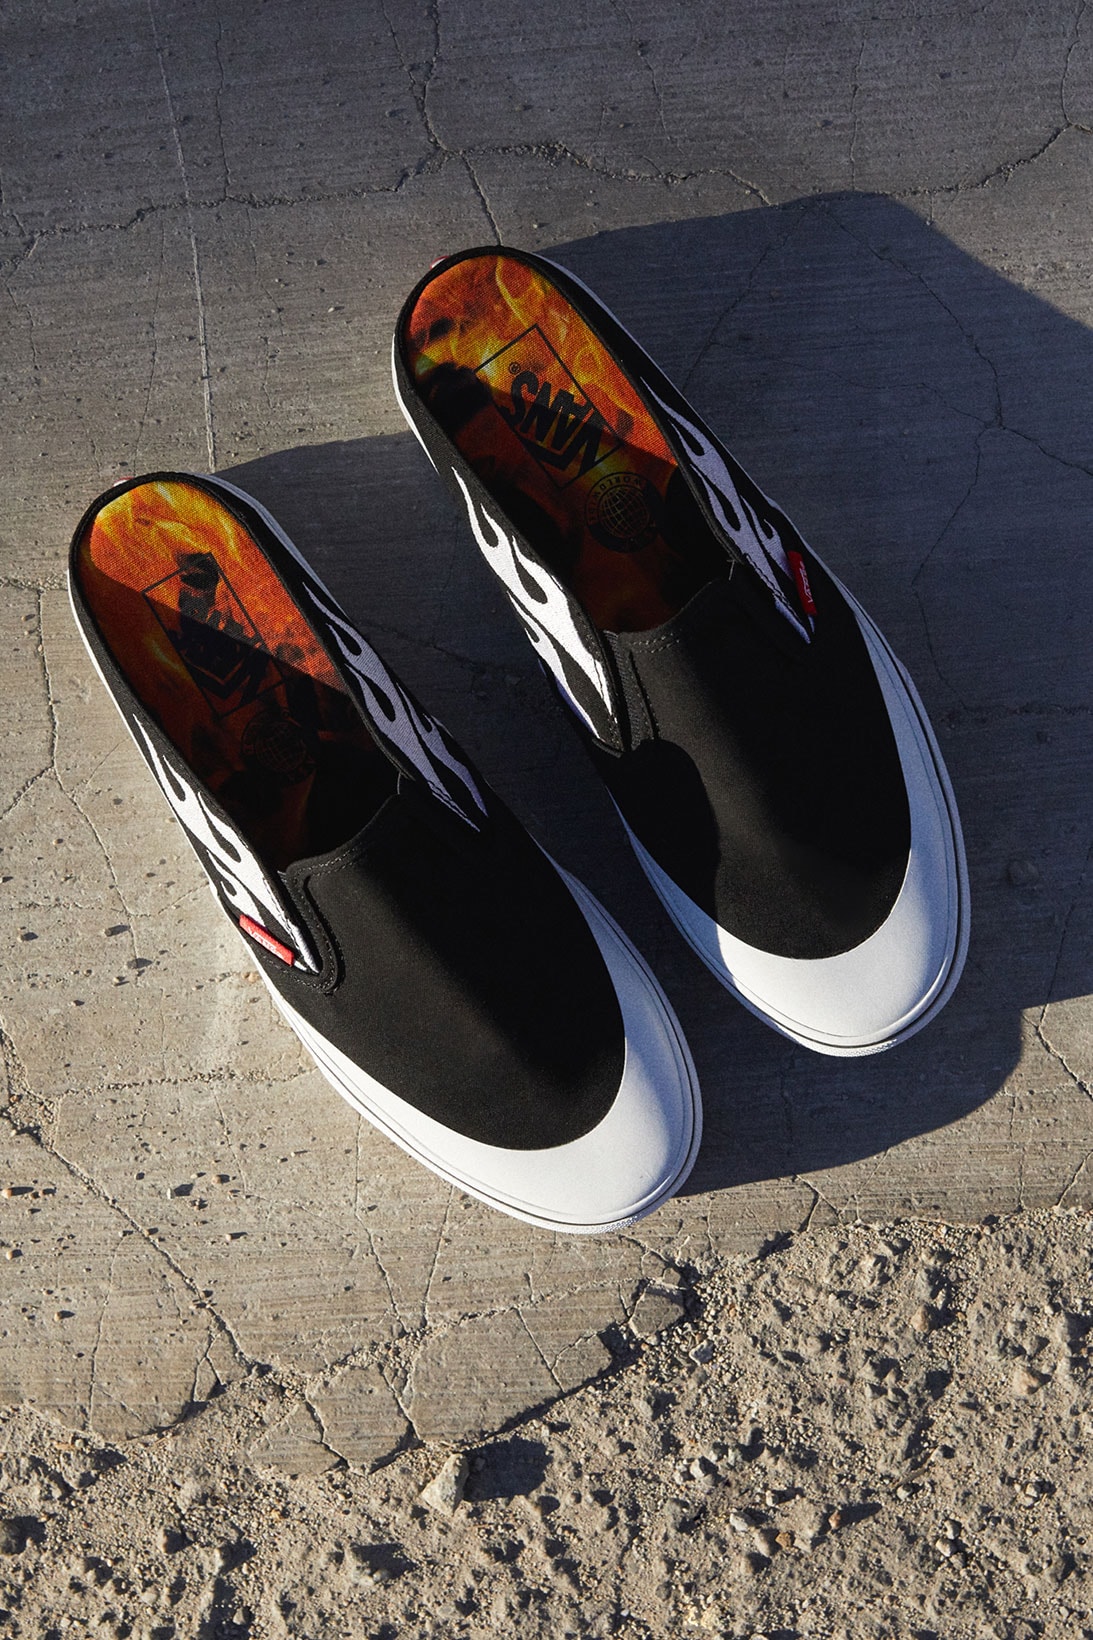 A$AP Rocky Releases New Vans Collaboration With PacSun